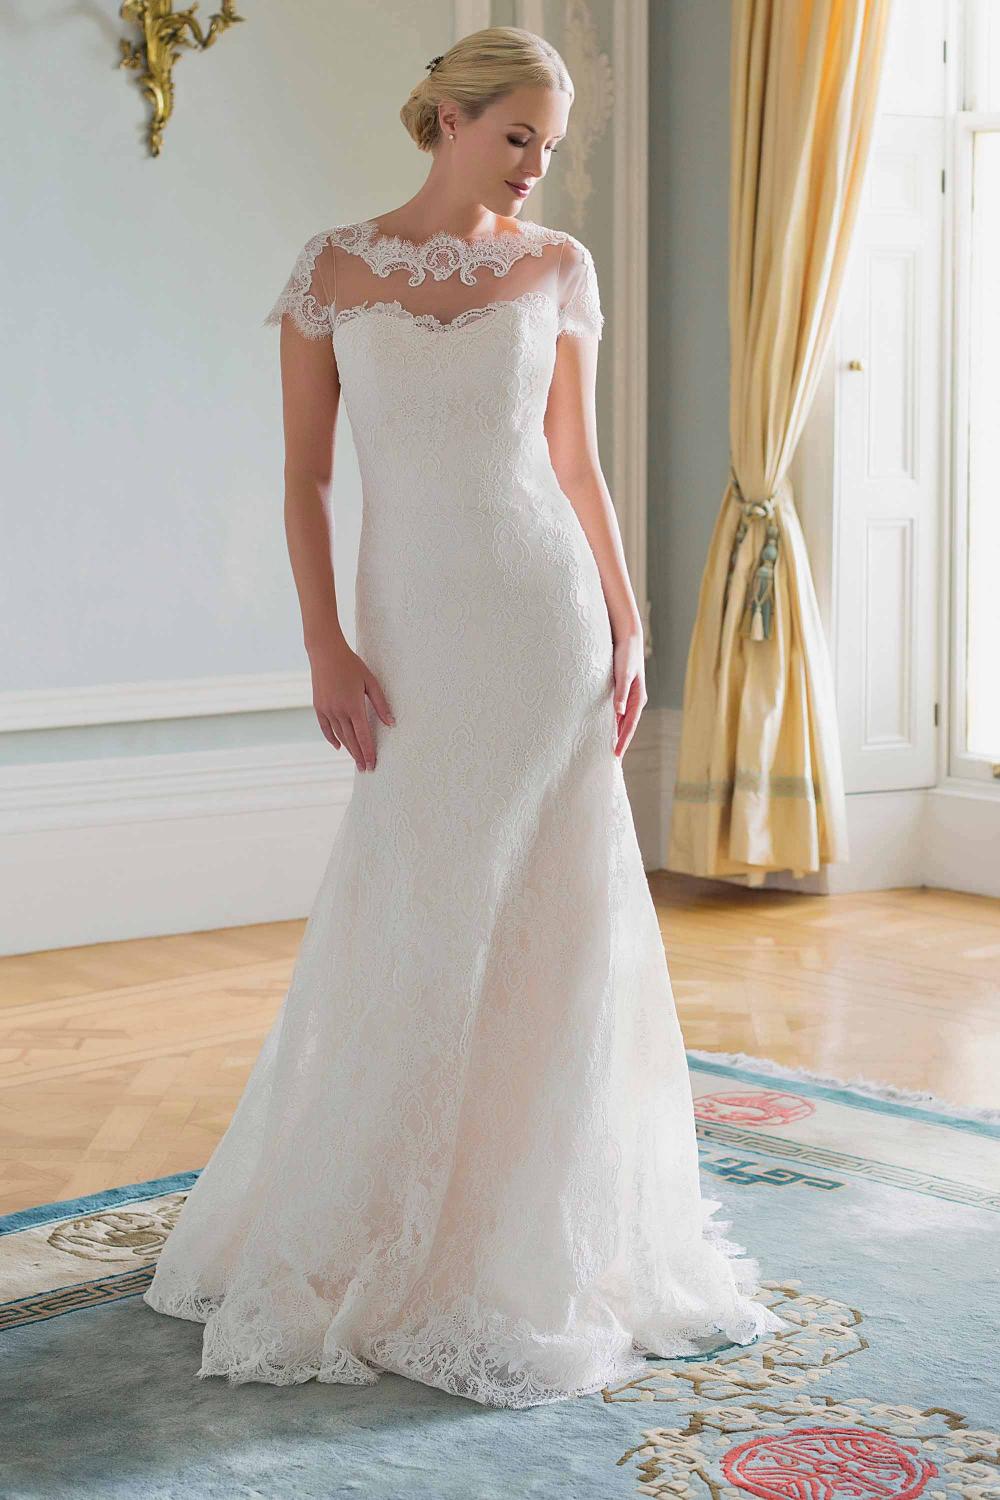 classic fit and flare wedding dress